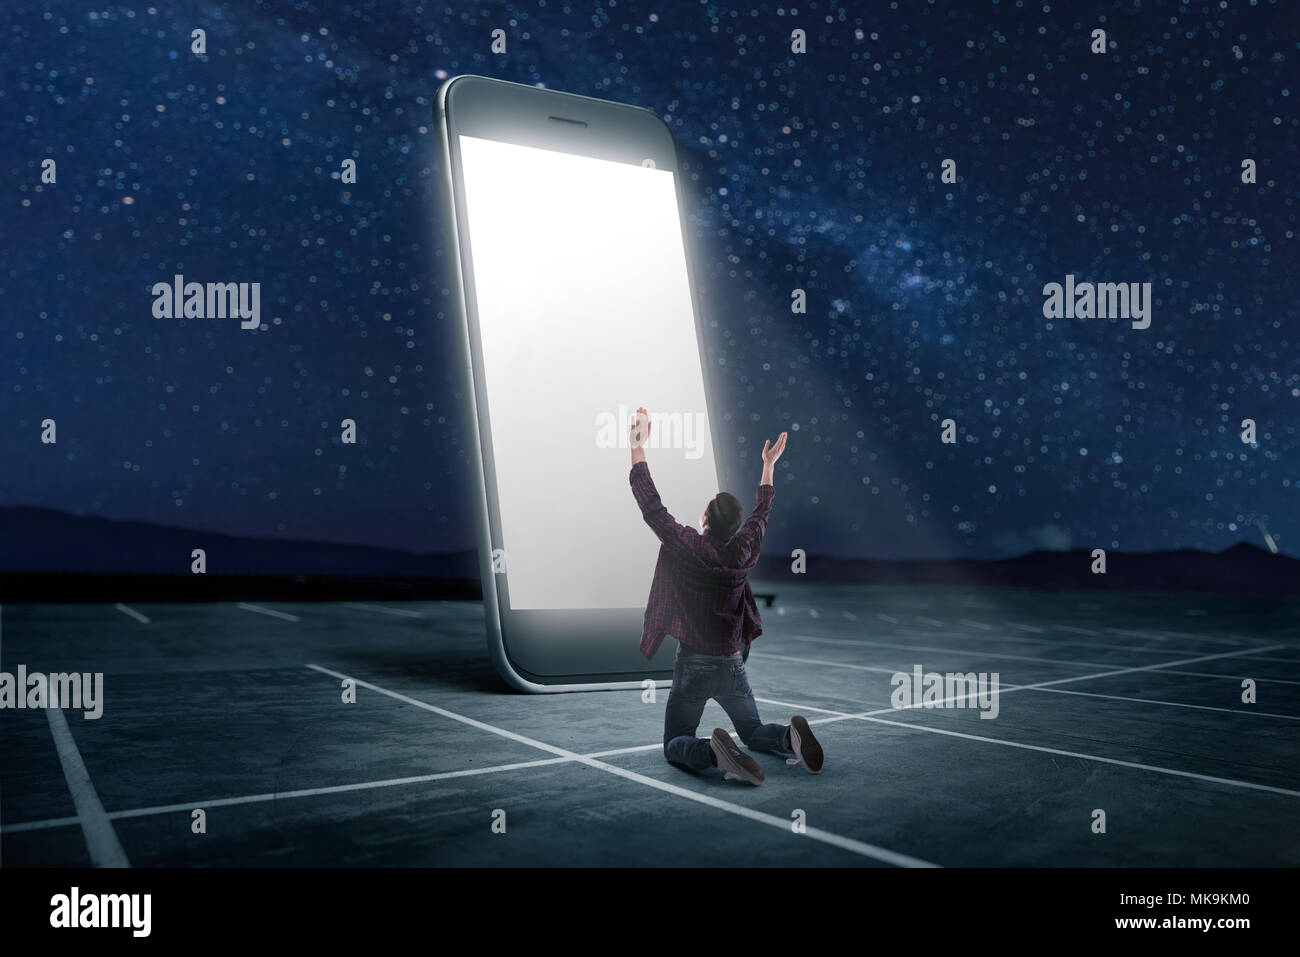 Phone addicted people concept. Man praying on his knees against large smartphone with glowing screen. Scaling effect Stock Photo